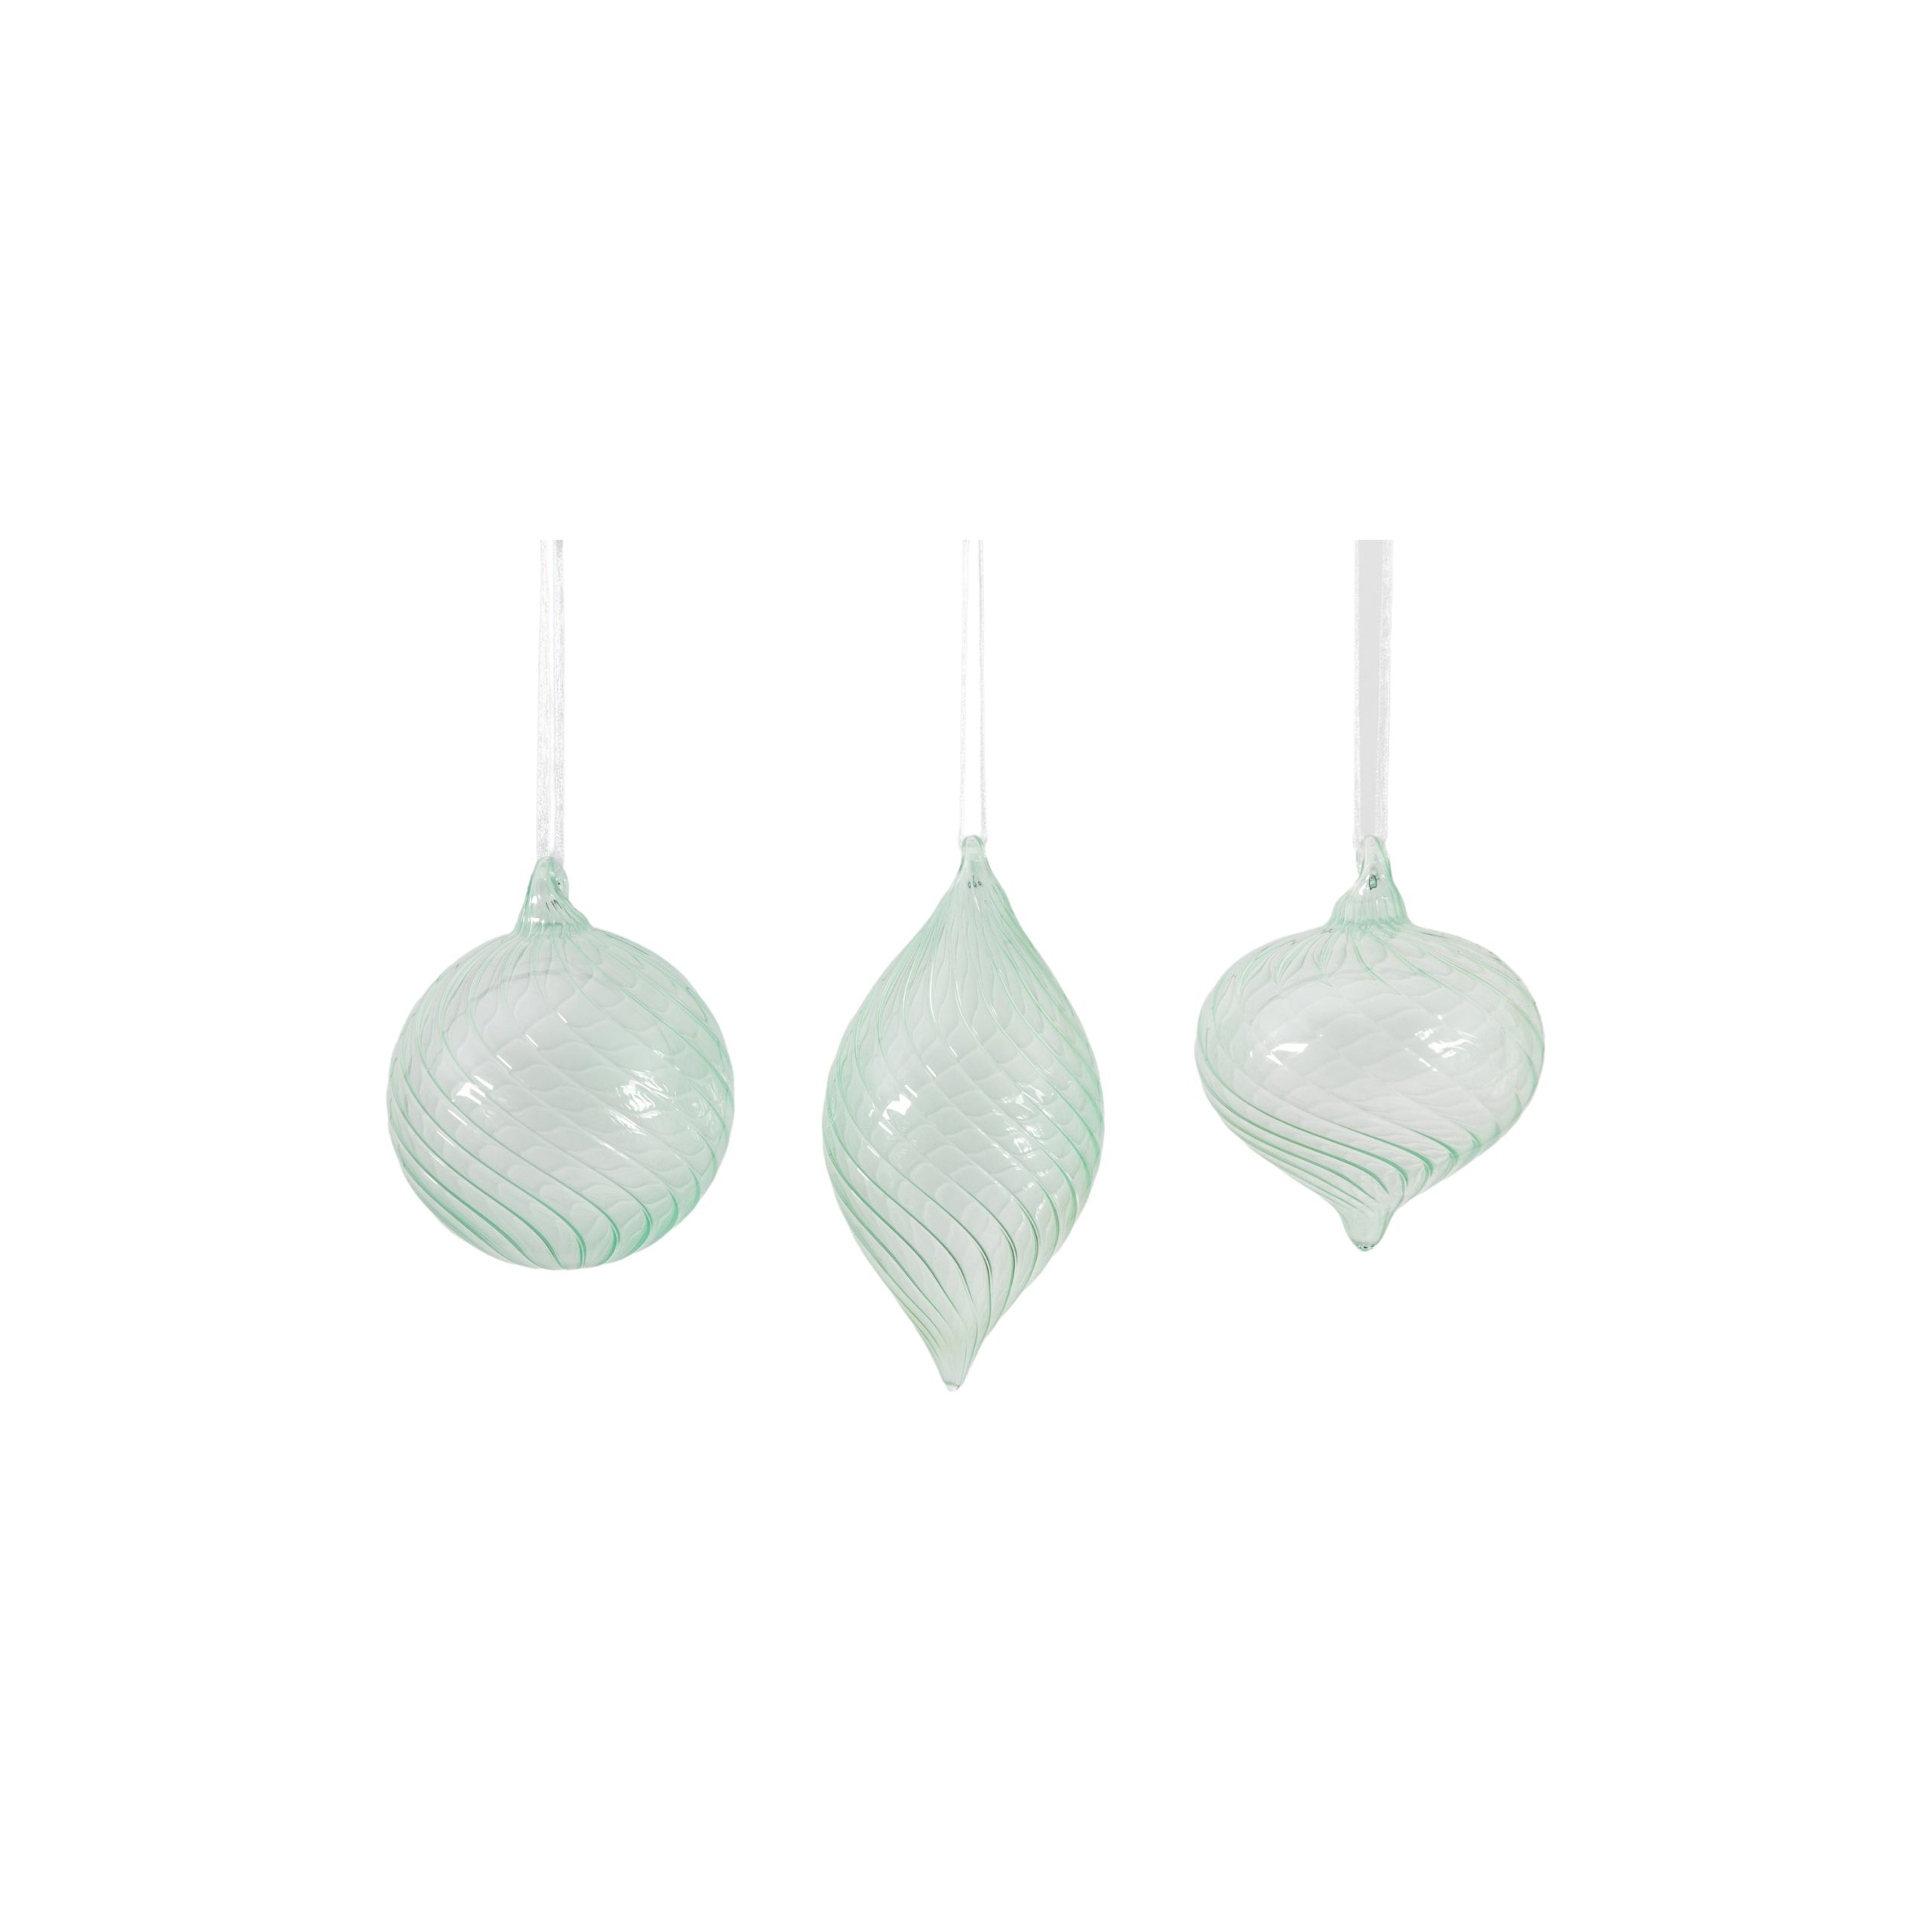 Gallery Direct Kalina Baubles Mint Green (Set of 3)